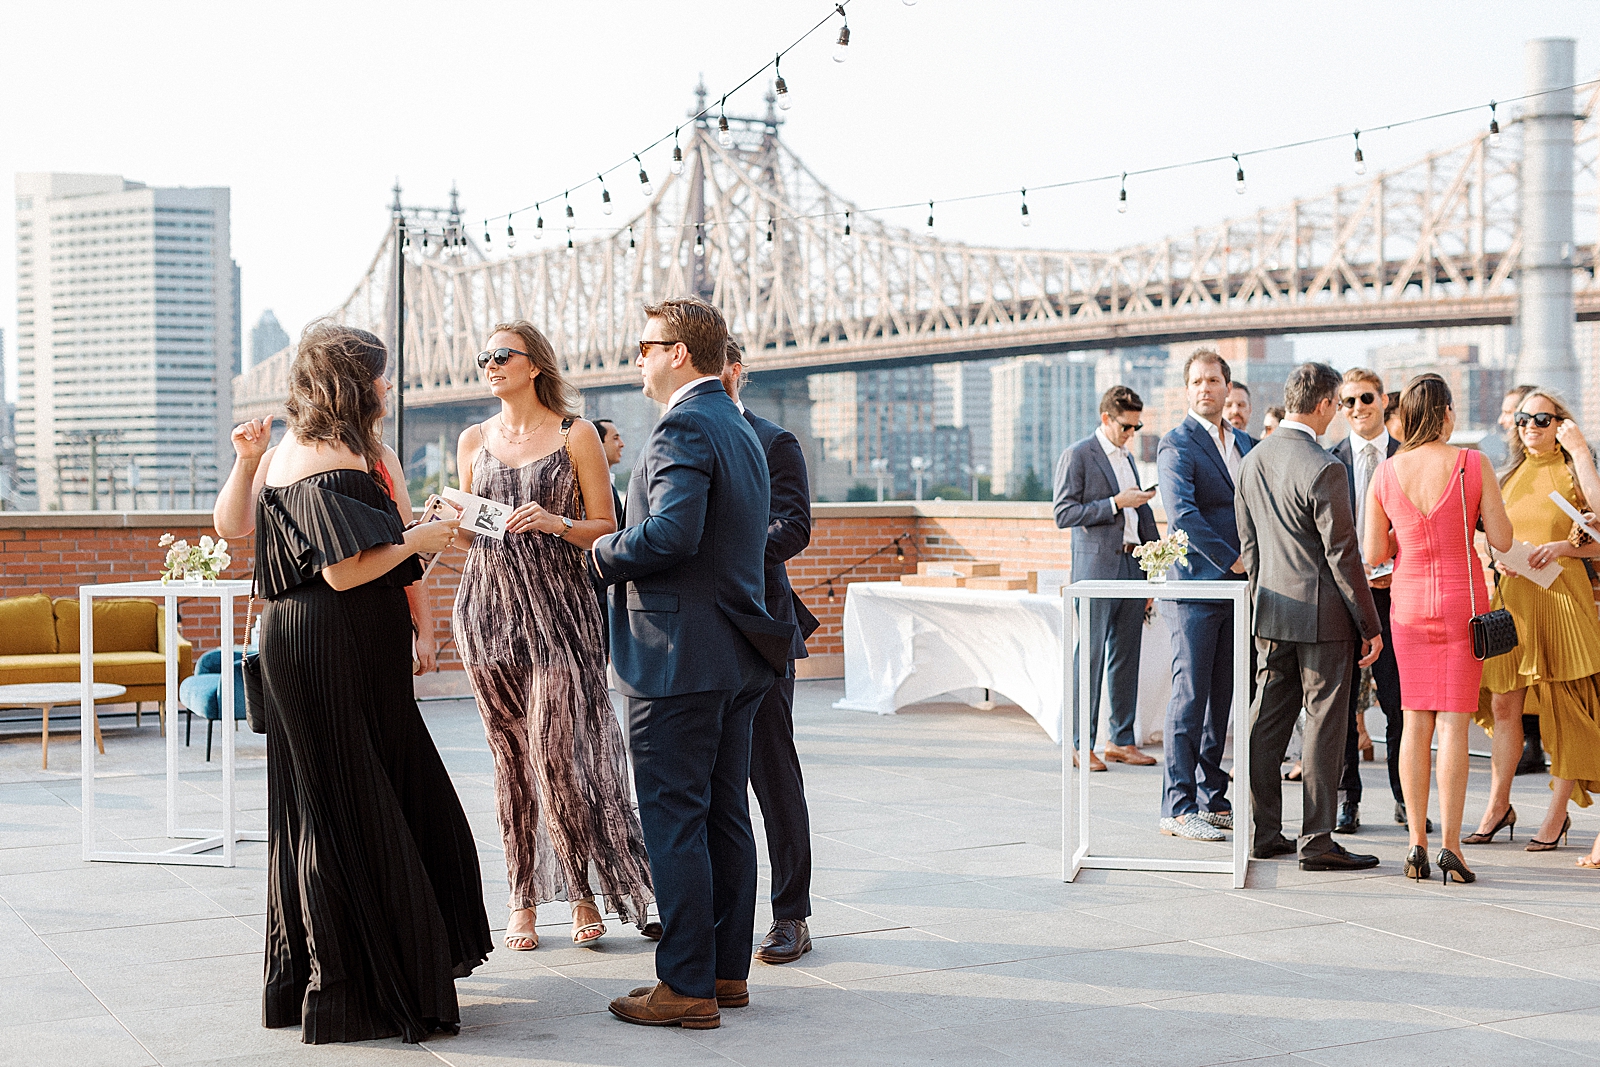 Candid shot of guests at cocktail hour with Queensboro bridge in the background